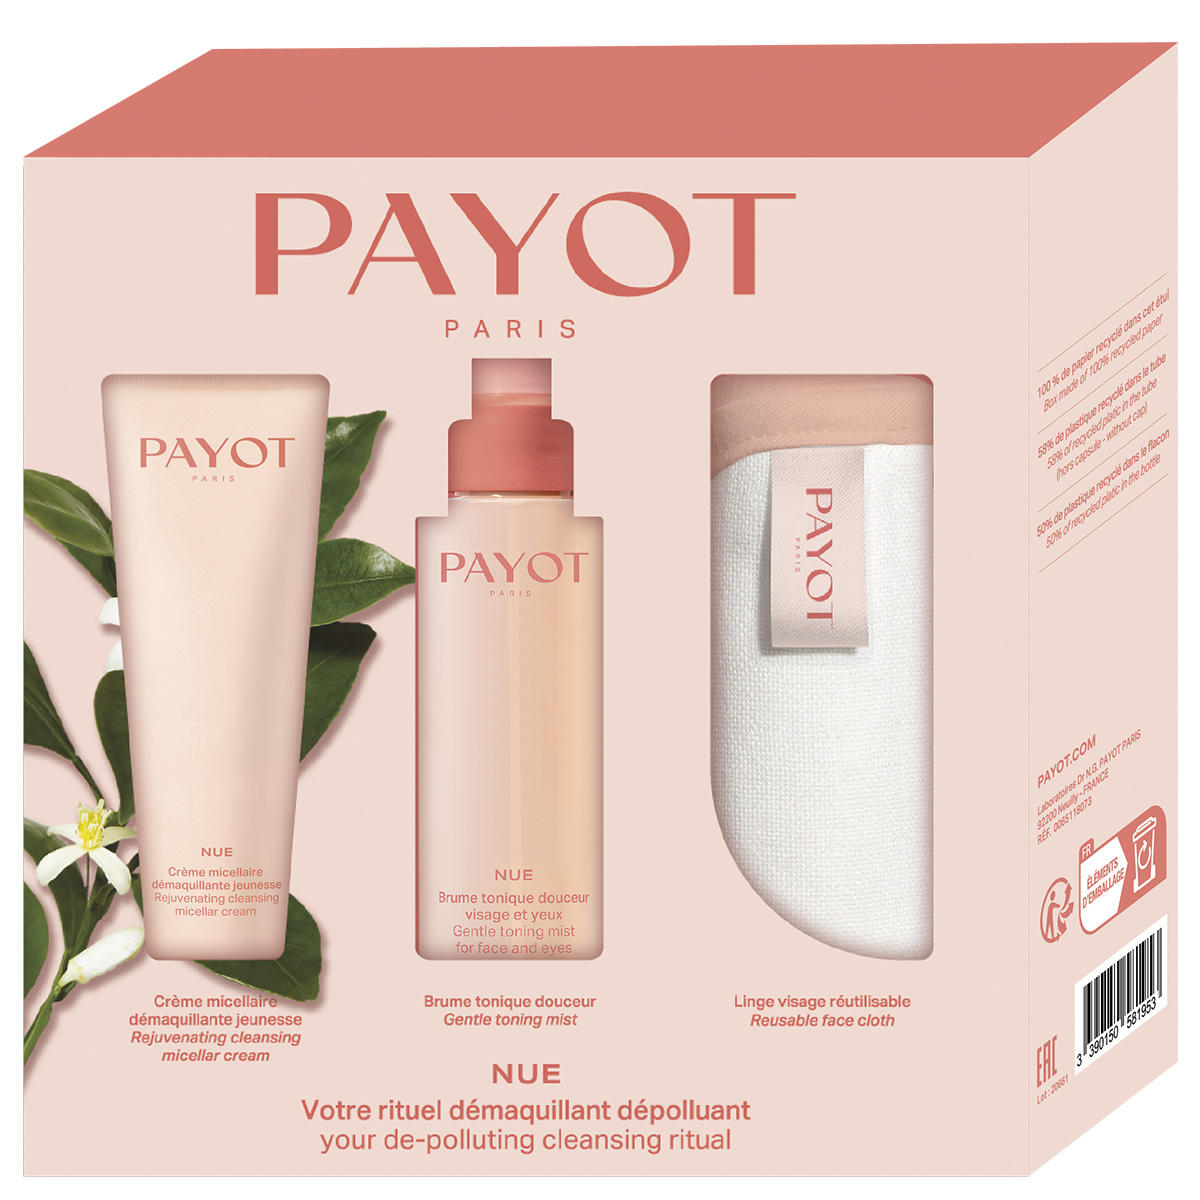 Payot Nue Launch Box  - 1